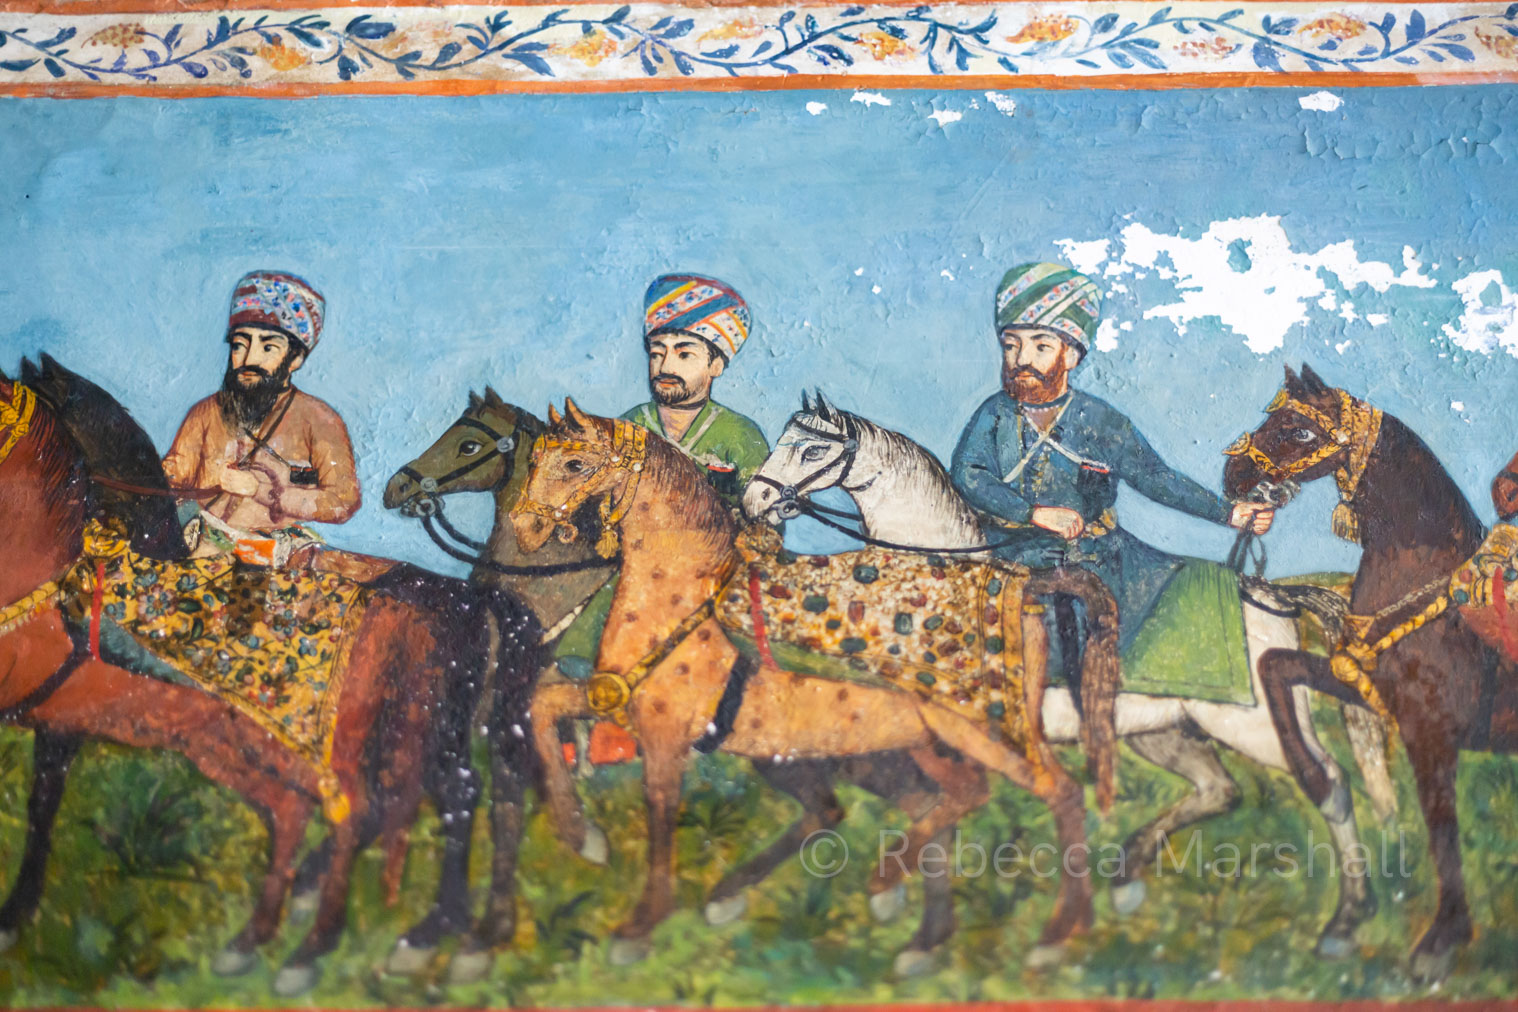 A close up photograph of an 18th-century colour fresco, showing horses and their male riders